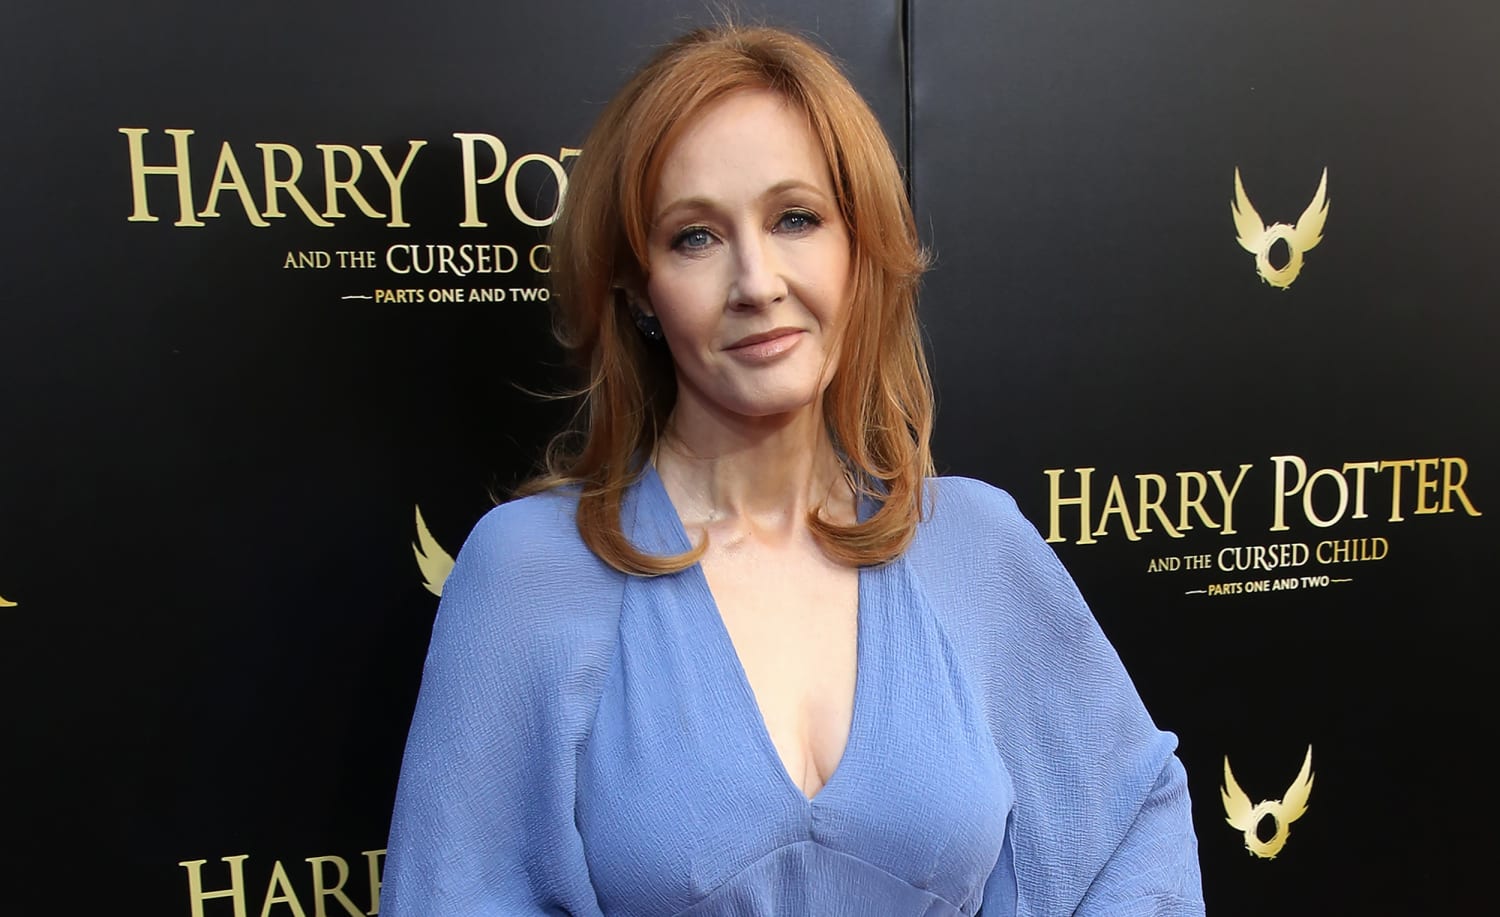 J K Rowling Doubles Down In What Some Critics Call A Transphobic